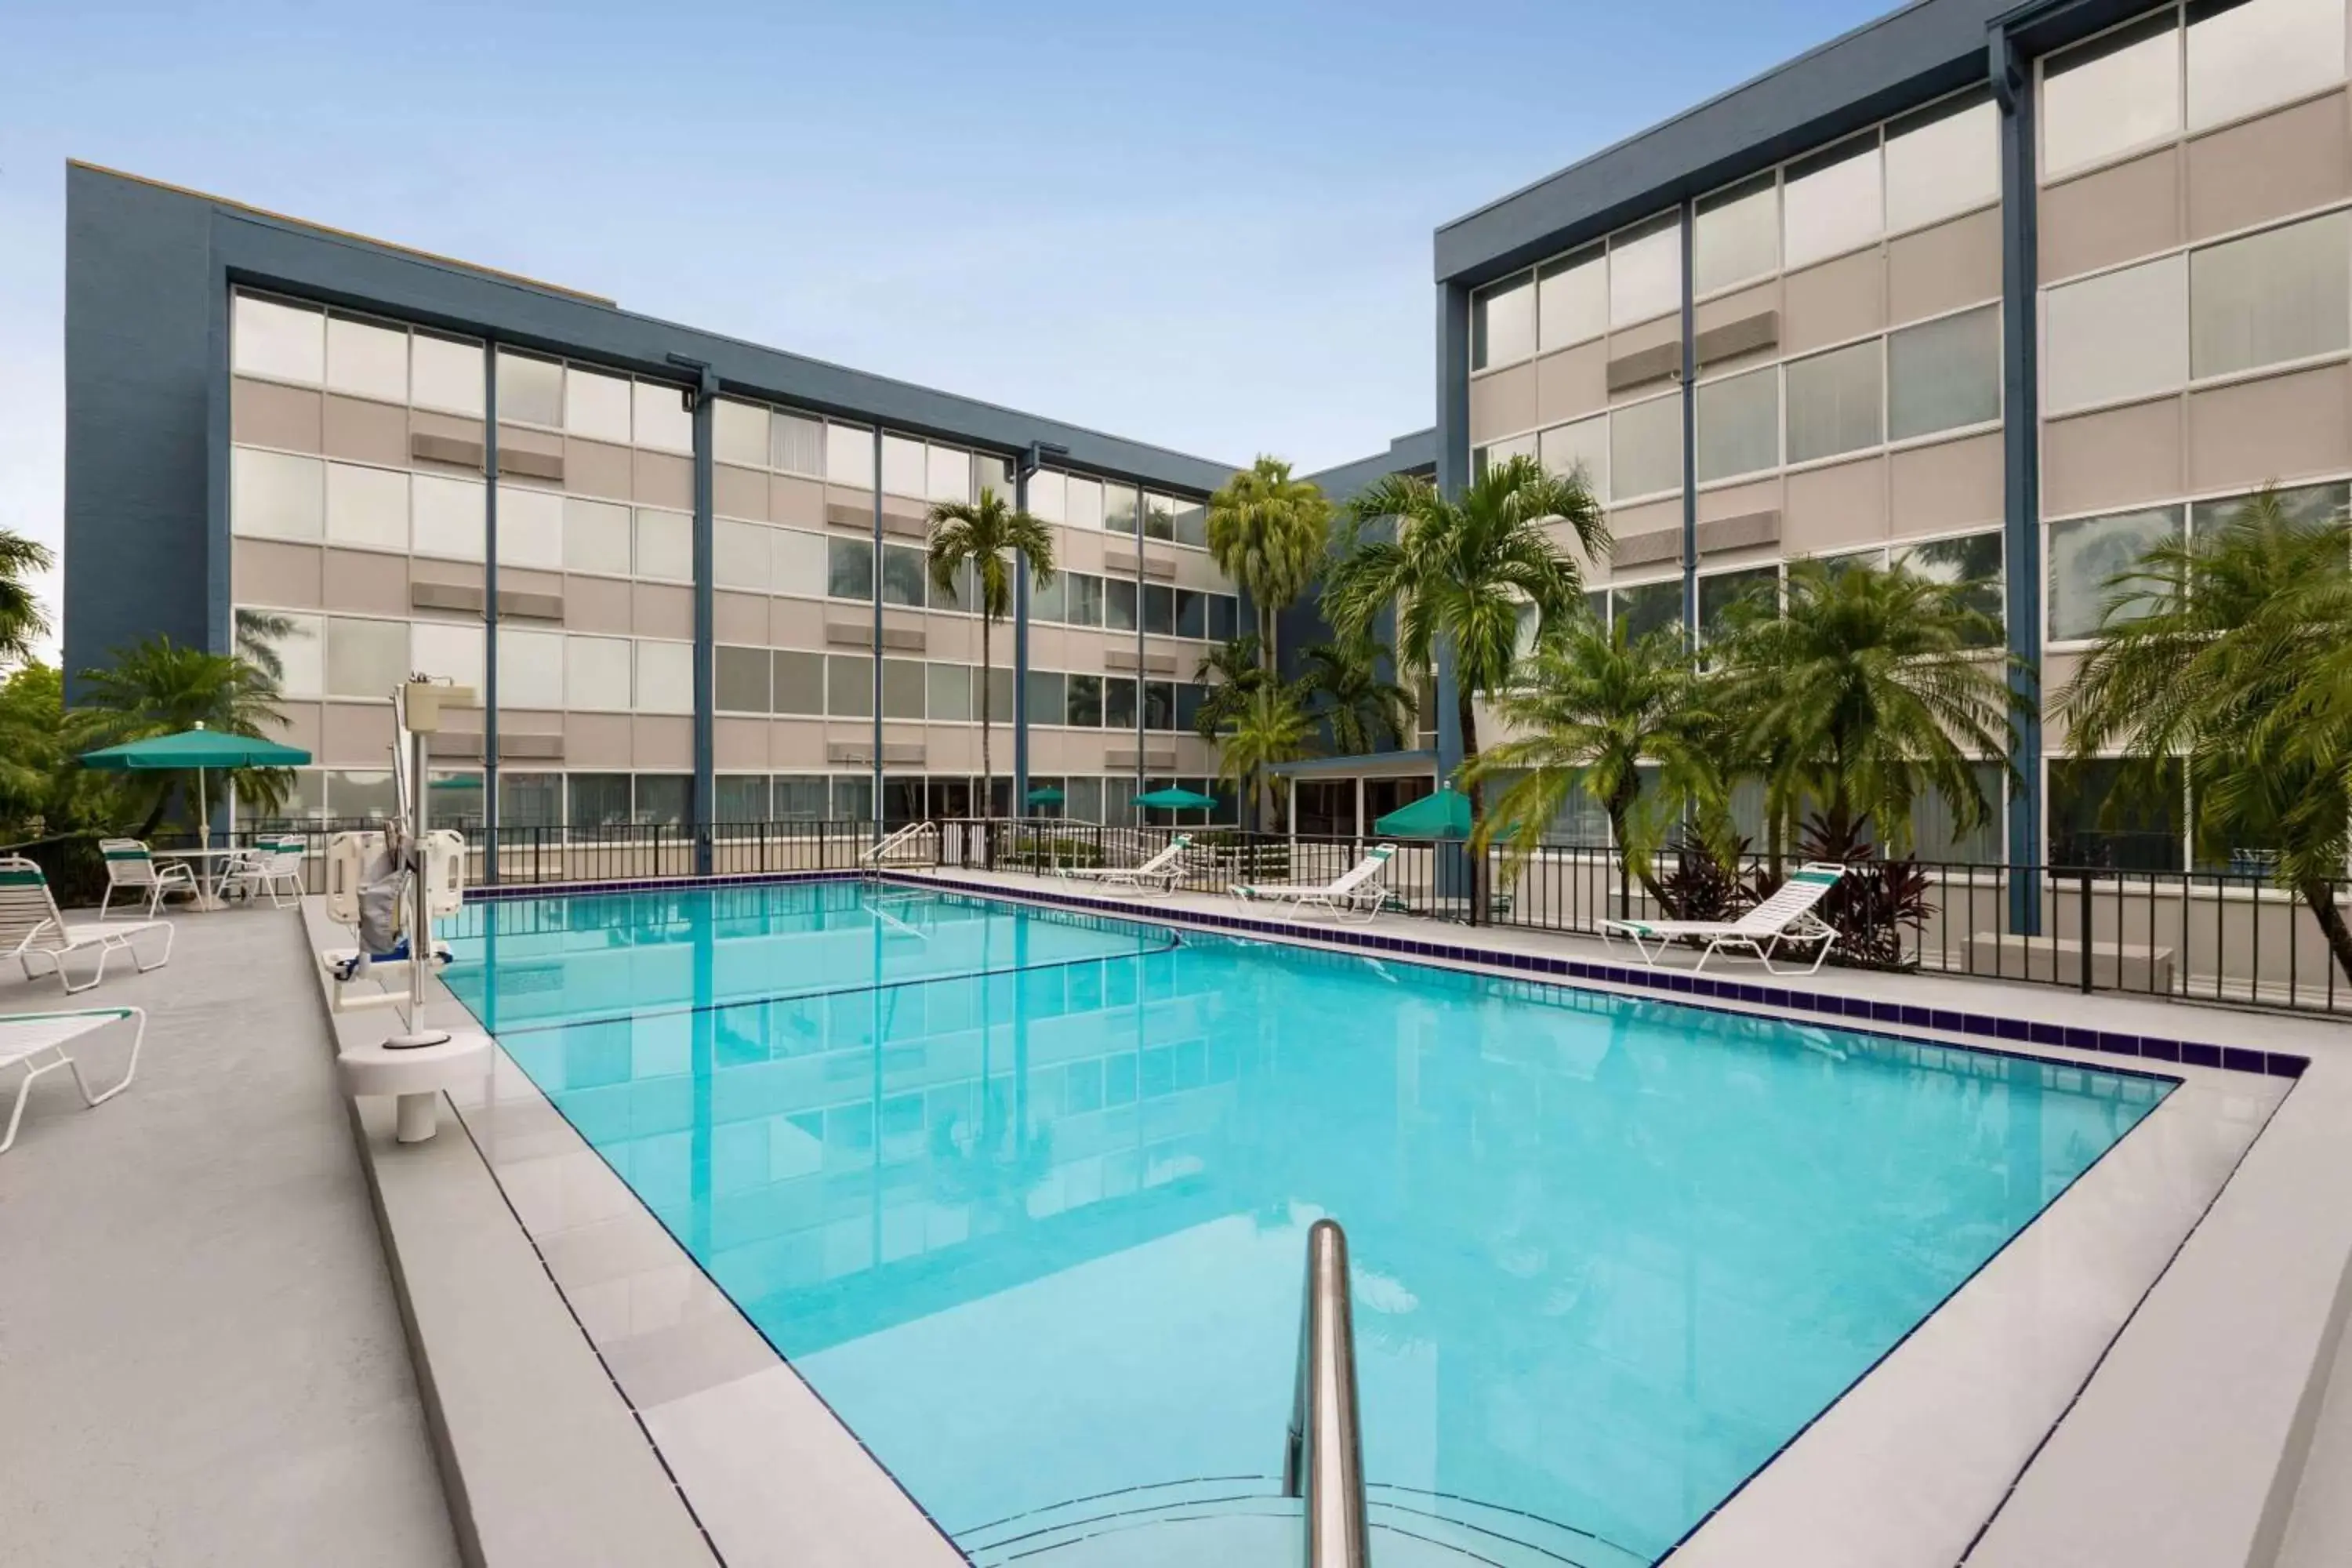 On site, Swimming Pool in Days Inn by Wyndham Miami International Airport